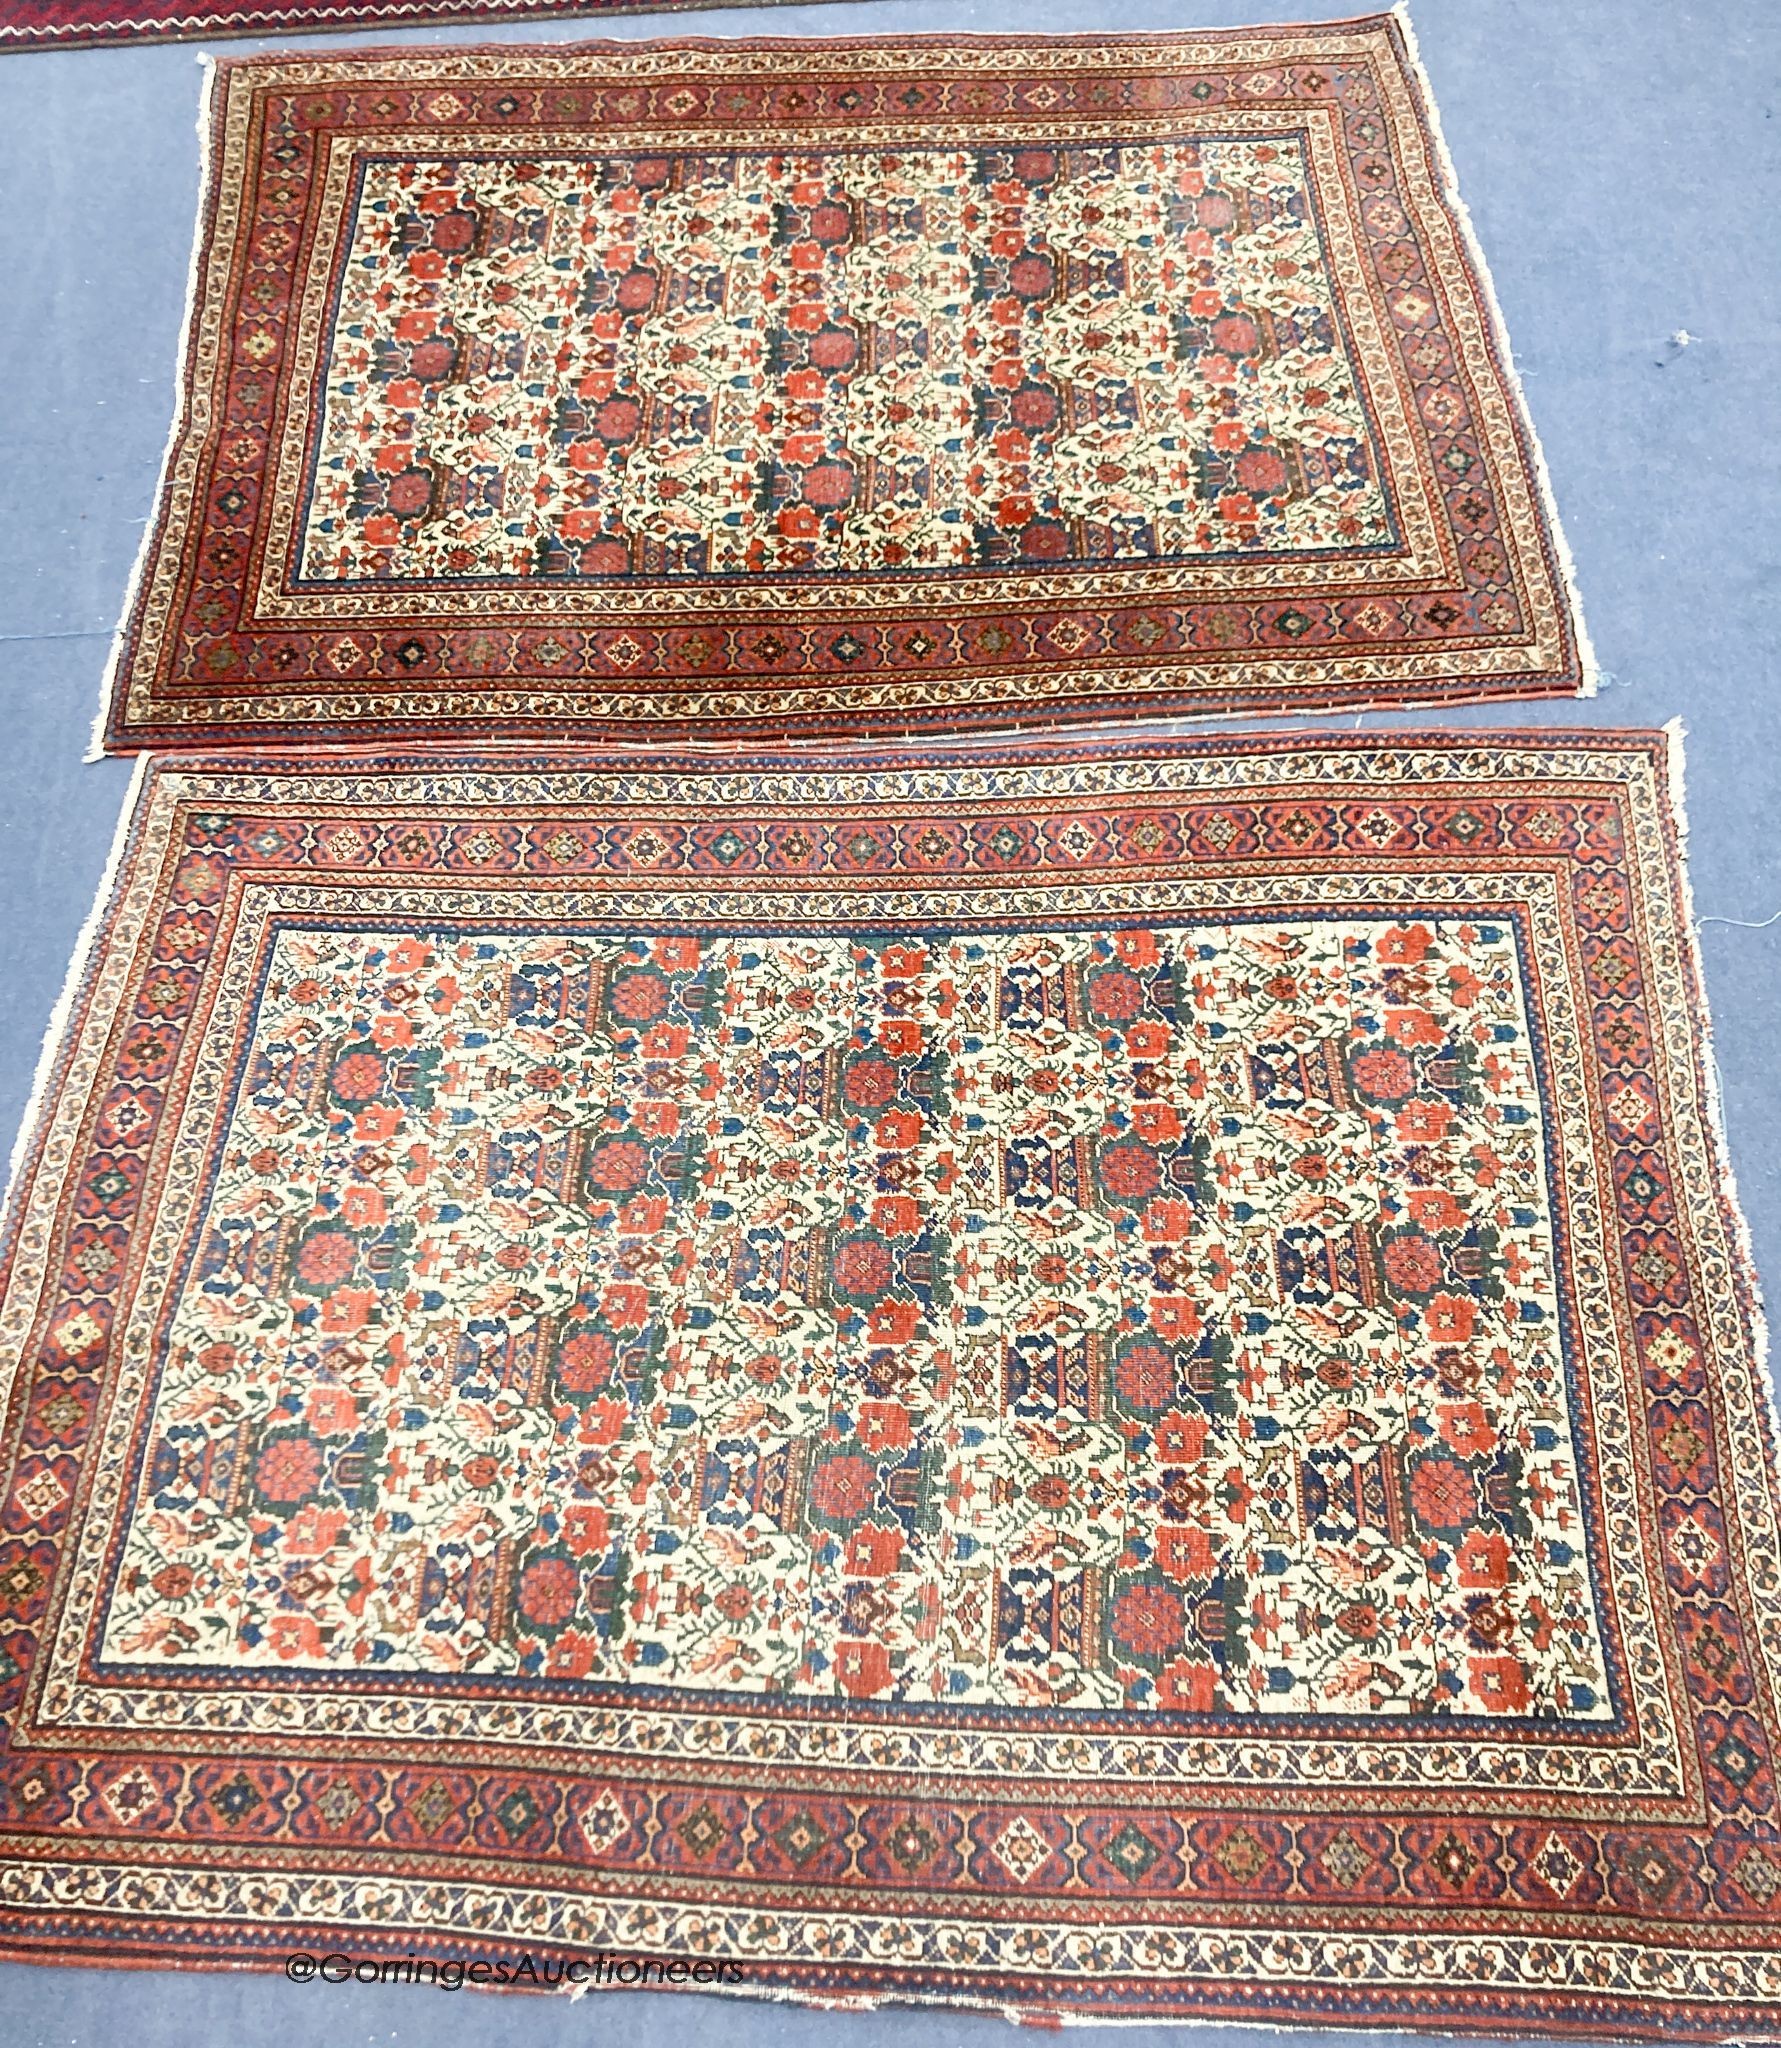 A pair of early 20th century North West Persian ivory ground rugs, woven with birds and vases of flowers, 150 x 110cm